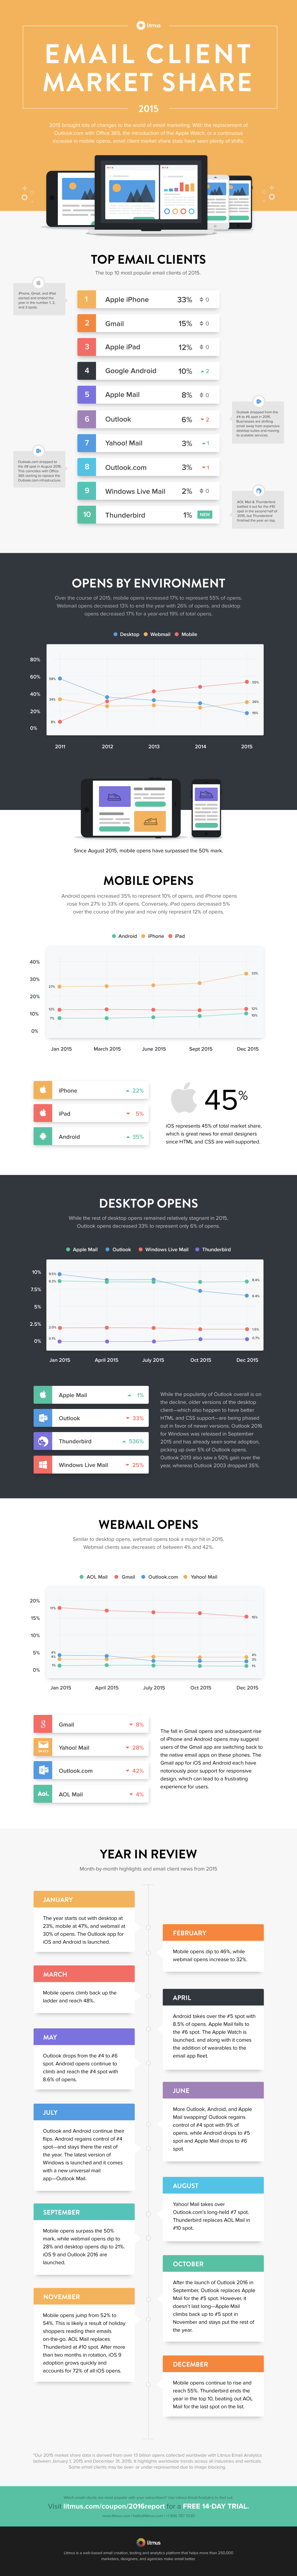 email-client-market-share-infographic.png